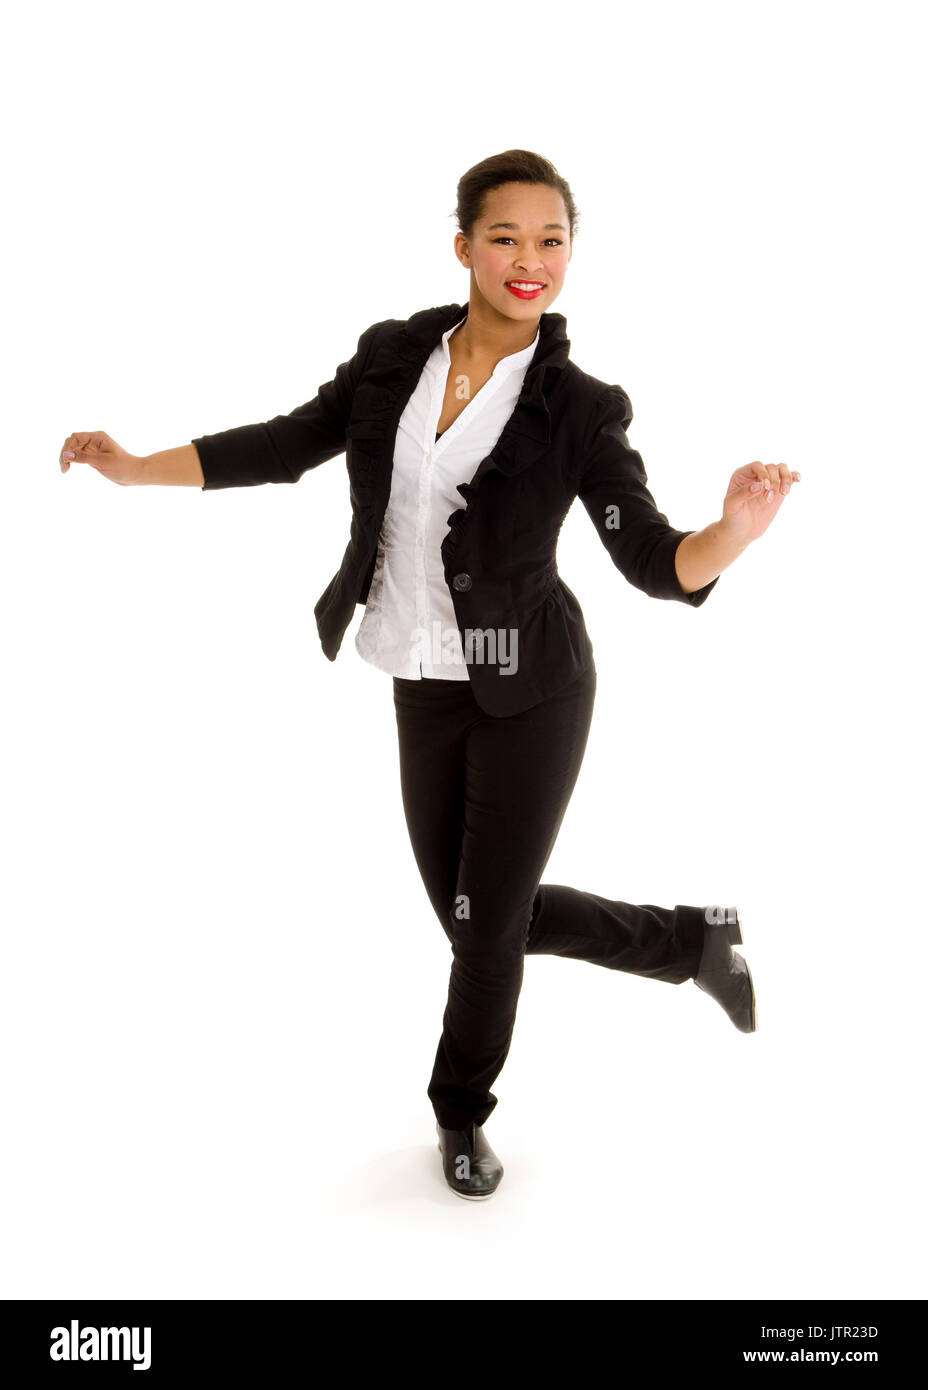 A Smiling Tap Dancing Girl in Black Costume Performs a Dance Routine Stock Photo